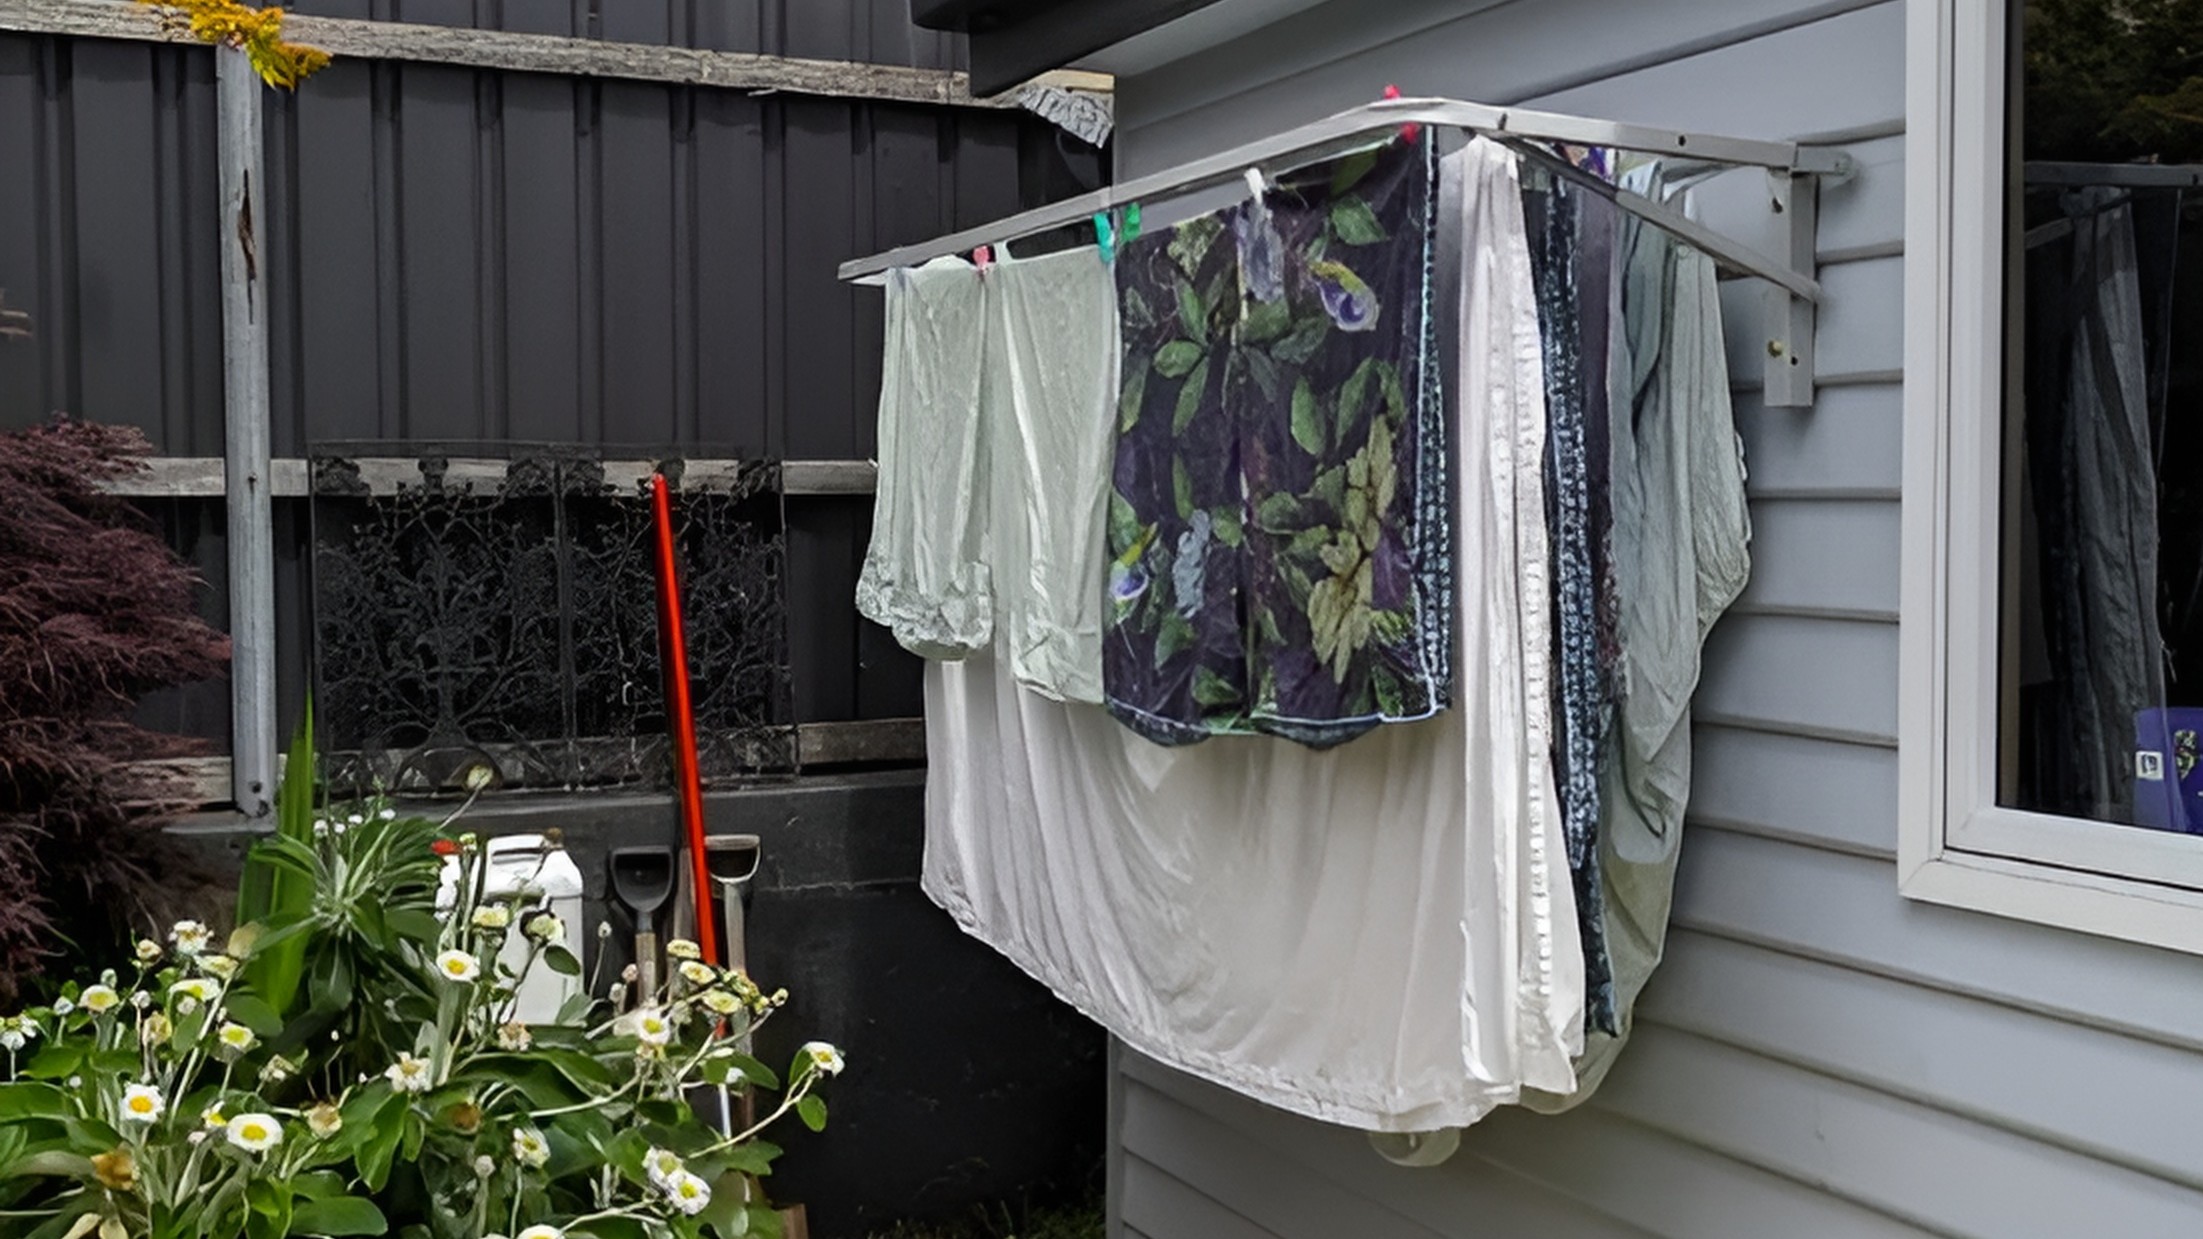 Eco 180 Clothesline Review: Is It the Sustainable Choice for Your Laundry?